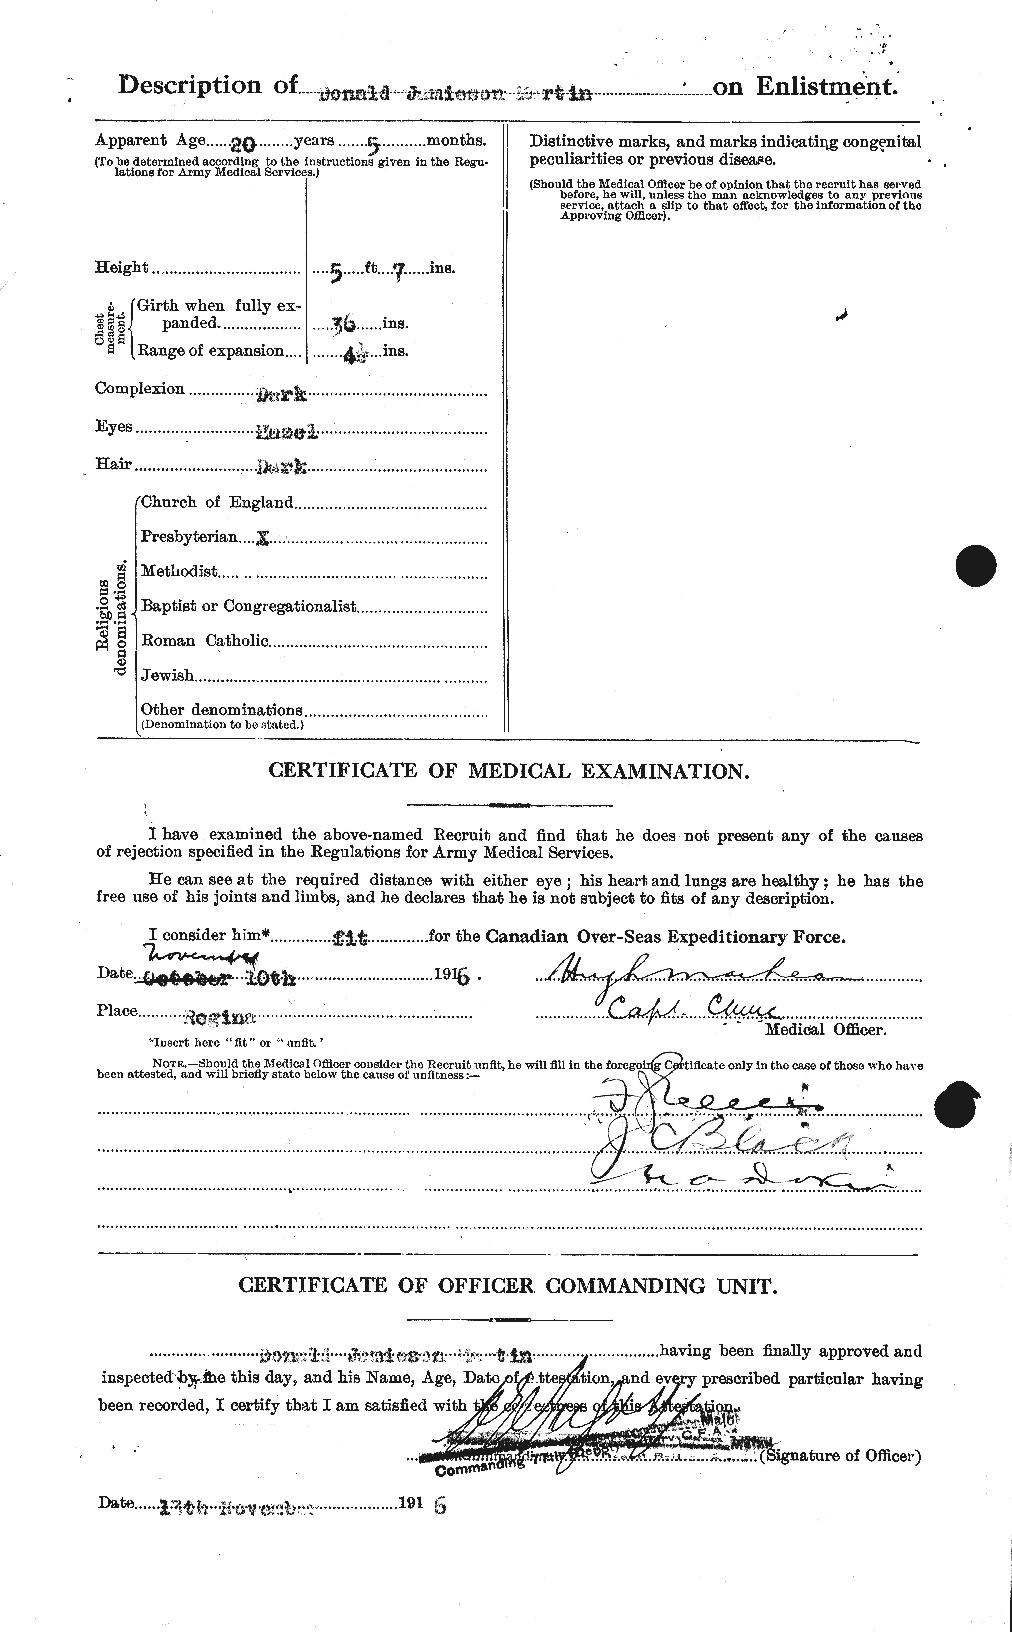 Personnel Records of the First World War - CEF 482828b